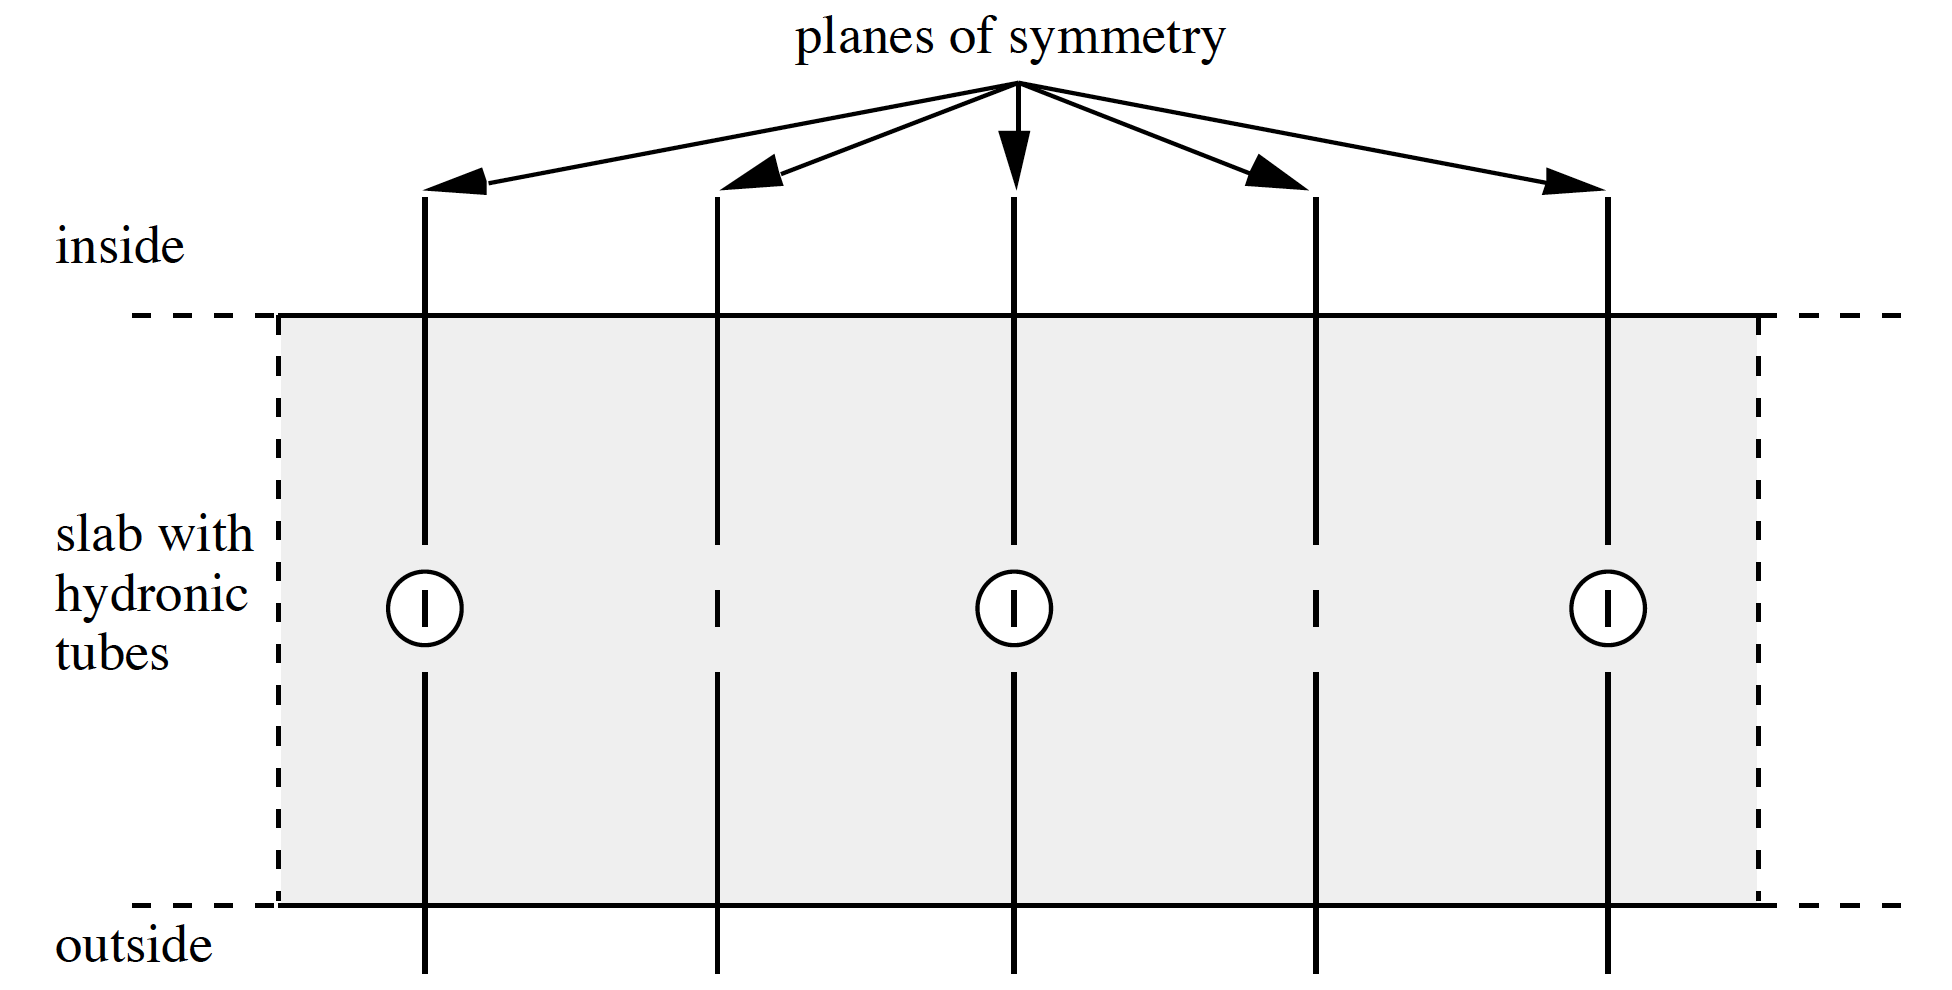 Cross Section of a Low Temperature Radiant System with Planes of Symmetry [fig:cross-section-of-a-low-temperature-radiant-system-with-planes-of-symmetry]